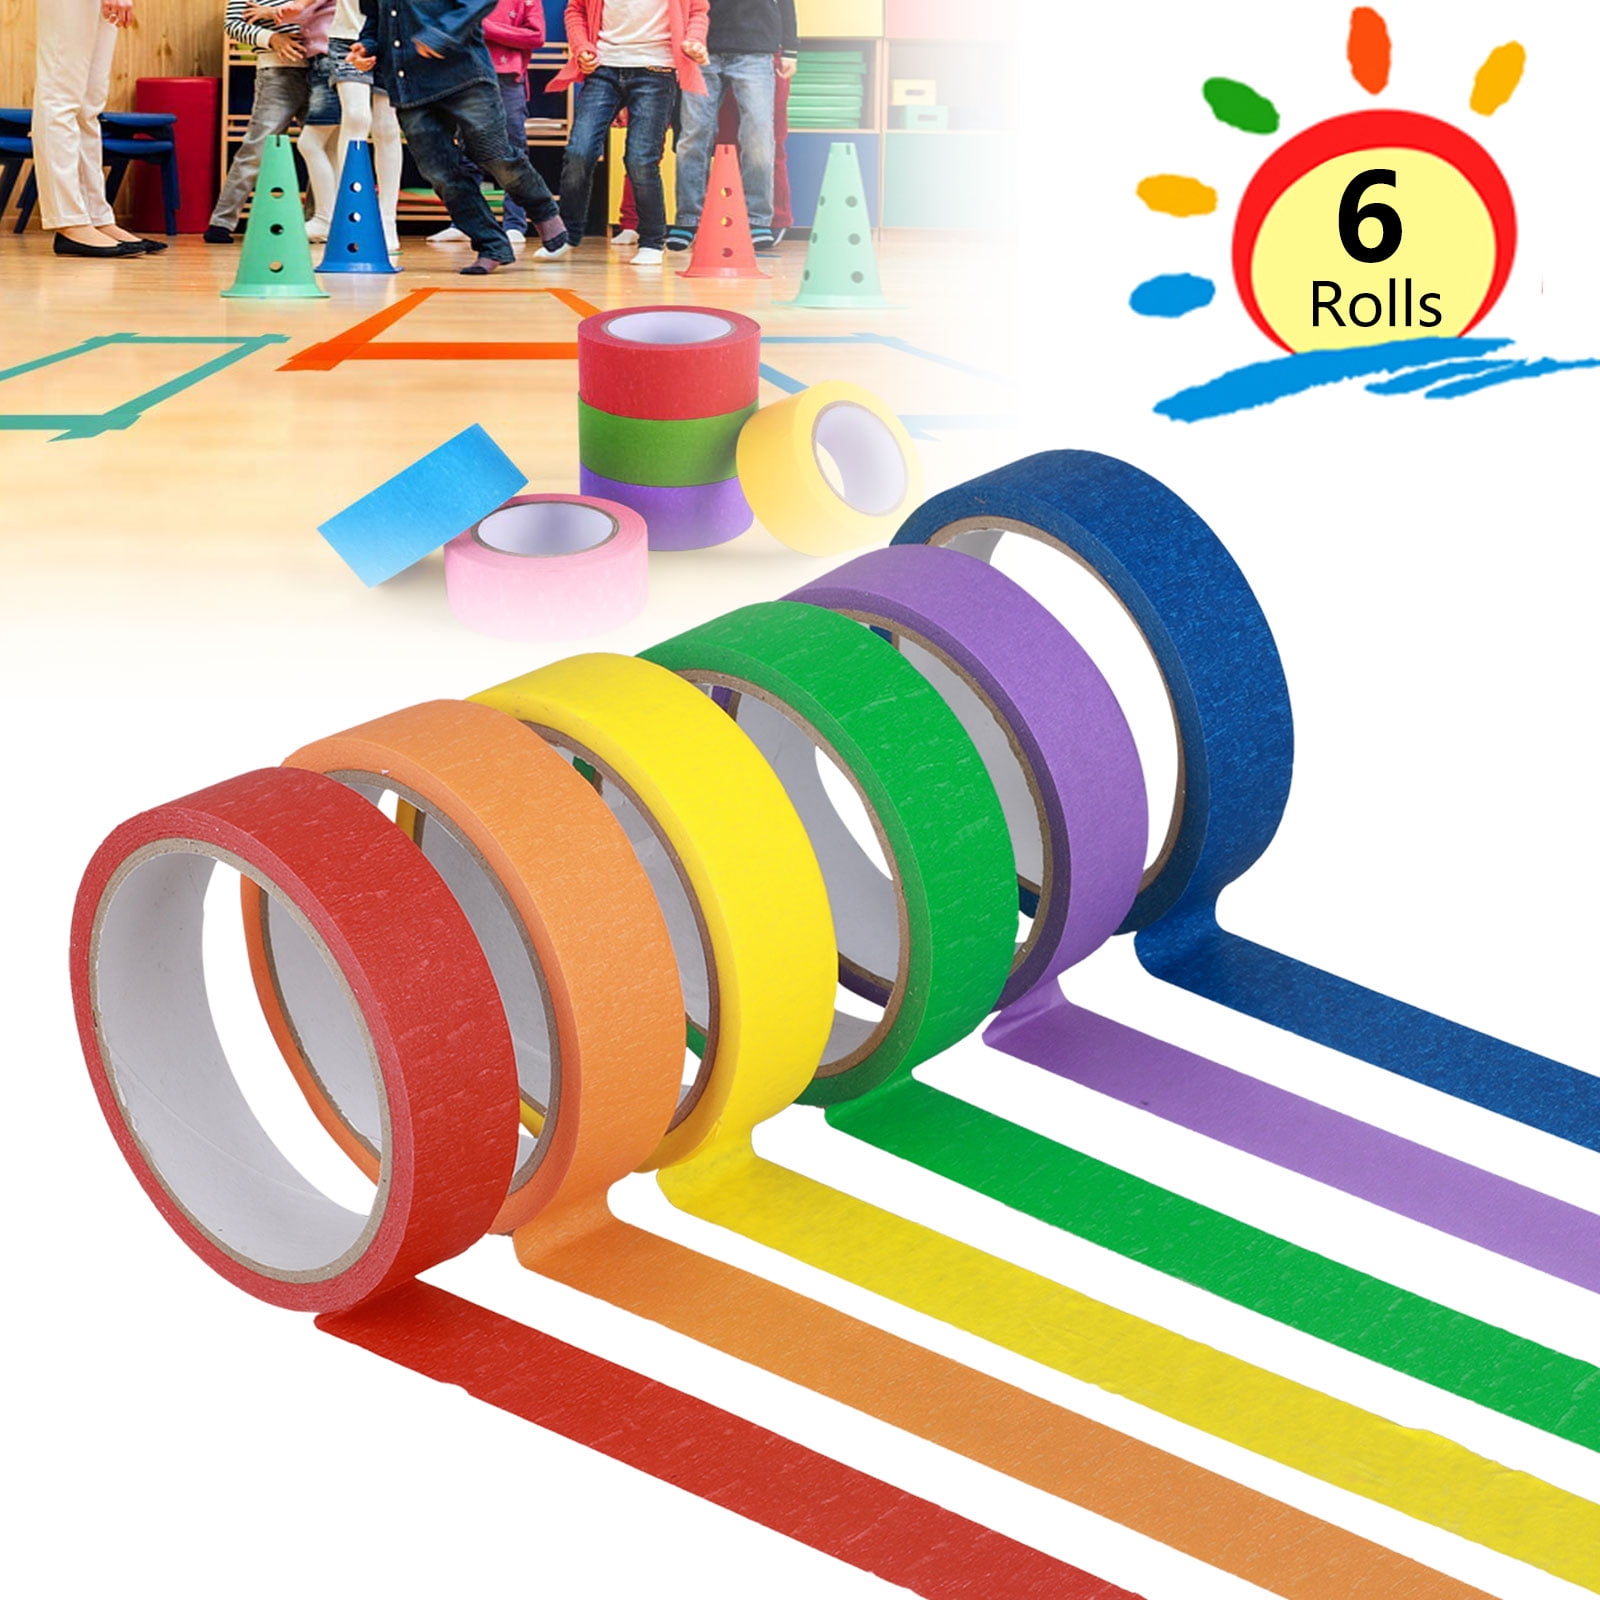 Wod Mtc5 Colored Masking Tape, Black, 4 inch x 60 yds. Colorful Teacher Painters Tape for Fun DIY Art & Crafts, Lab Labeling, Writable & Classroom